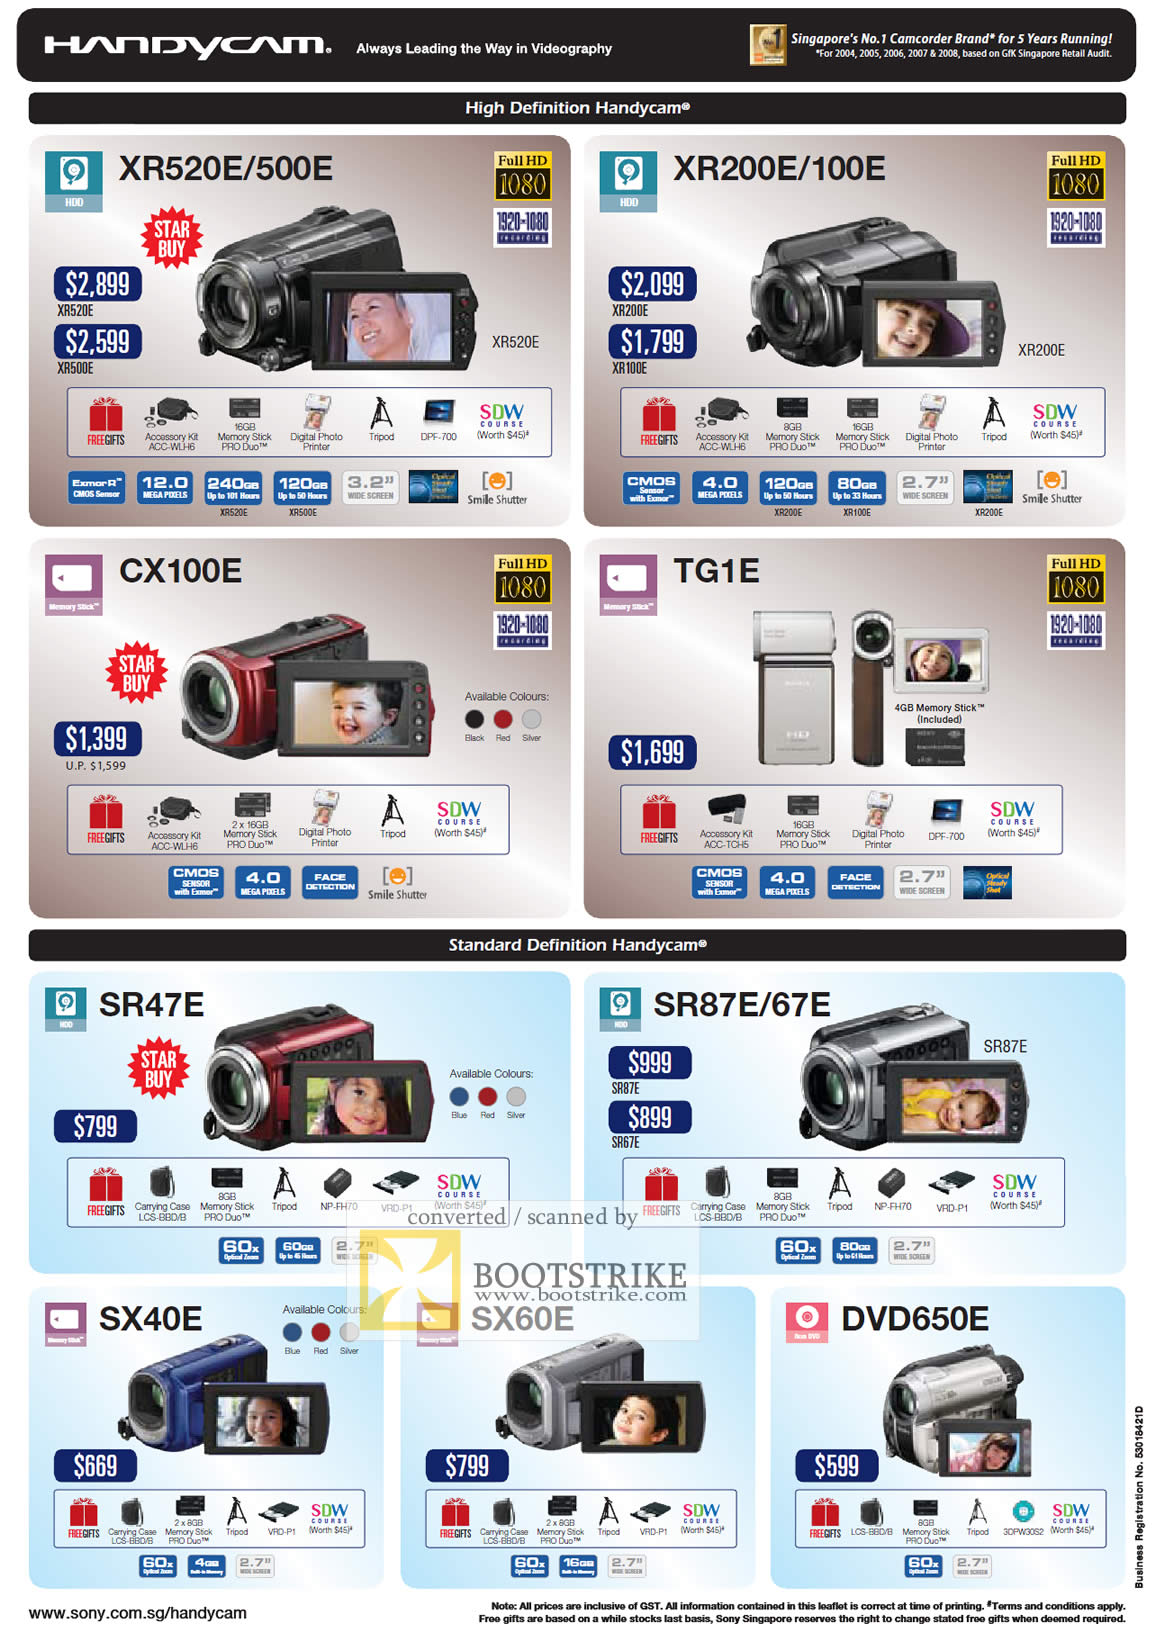 PC Show 2009 price list image brochure of Sony HandyCam High Definition Standard Definition DVD HDD Flash